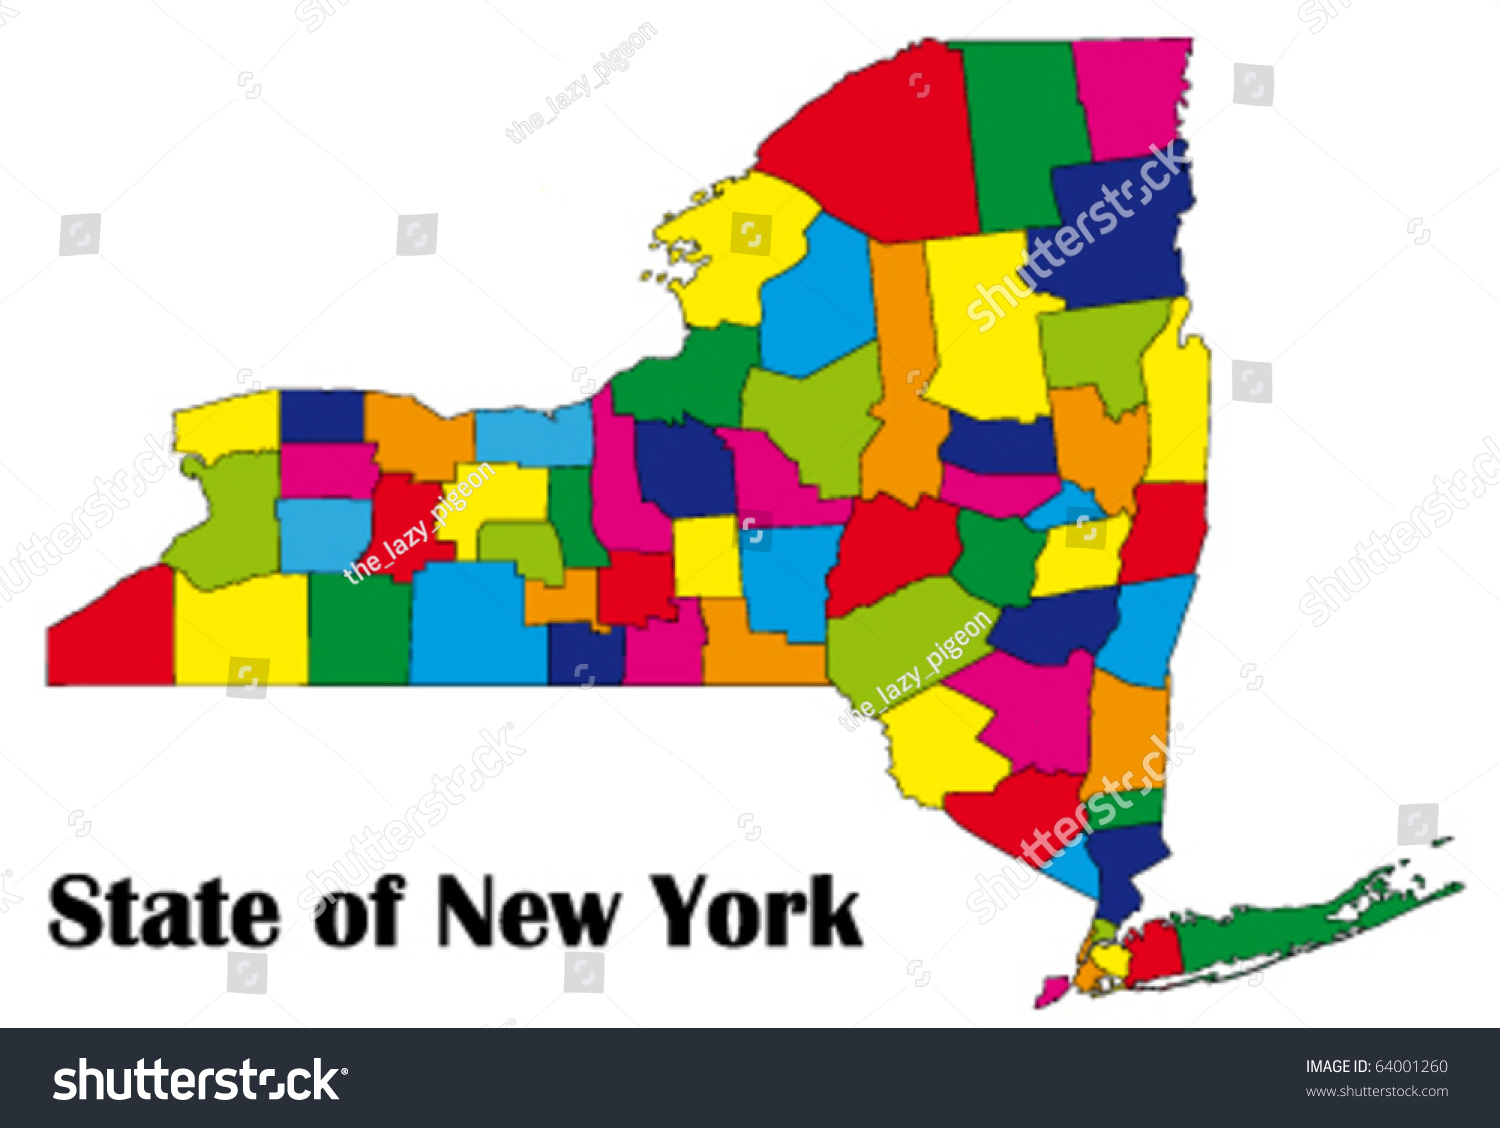 clip art of new york state - photo #33